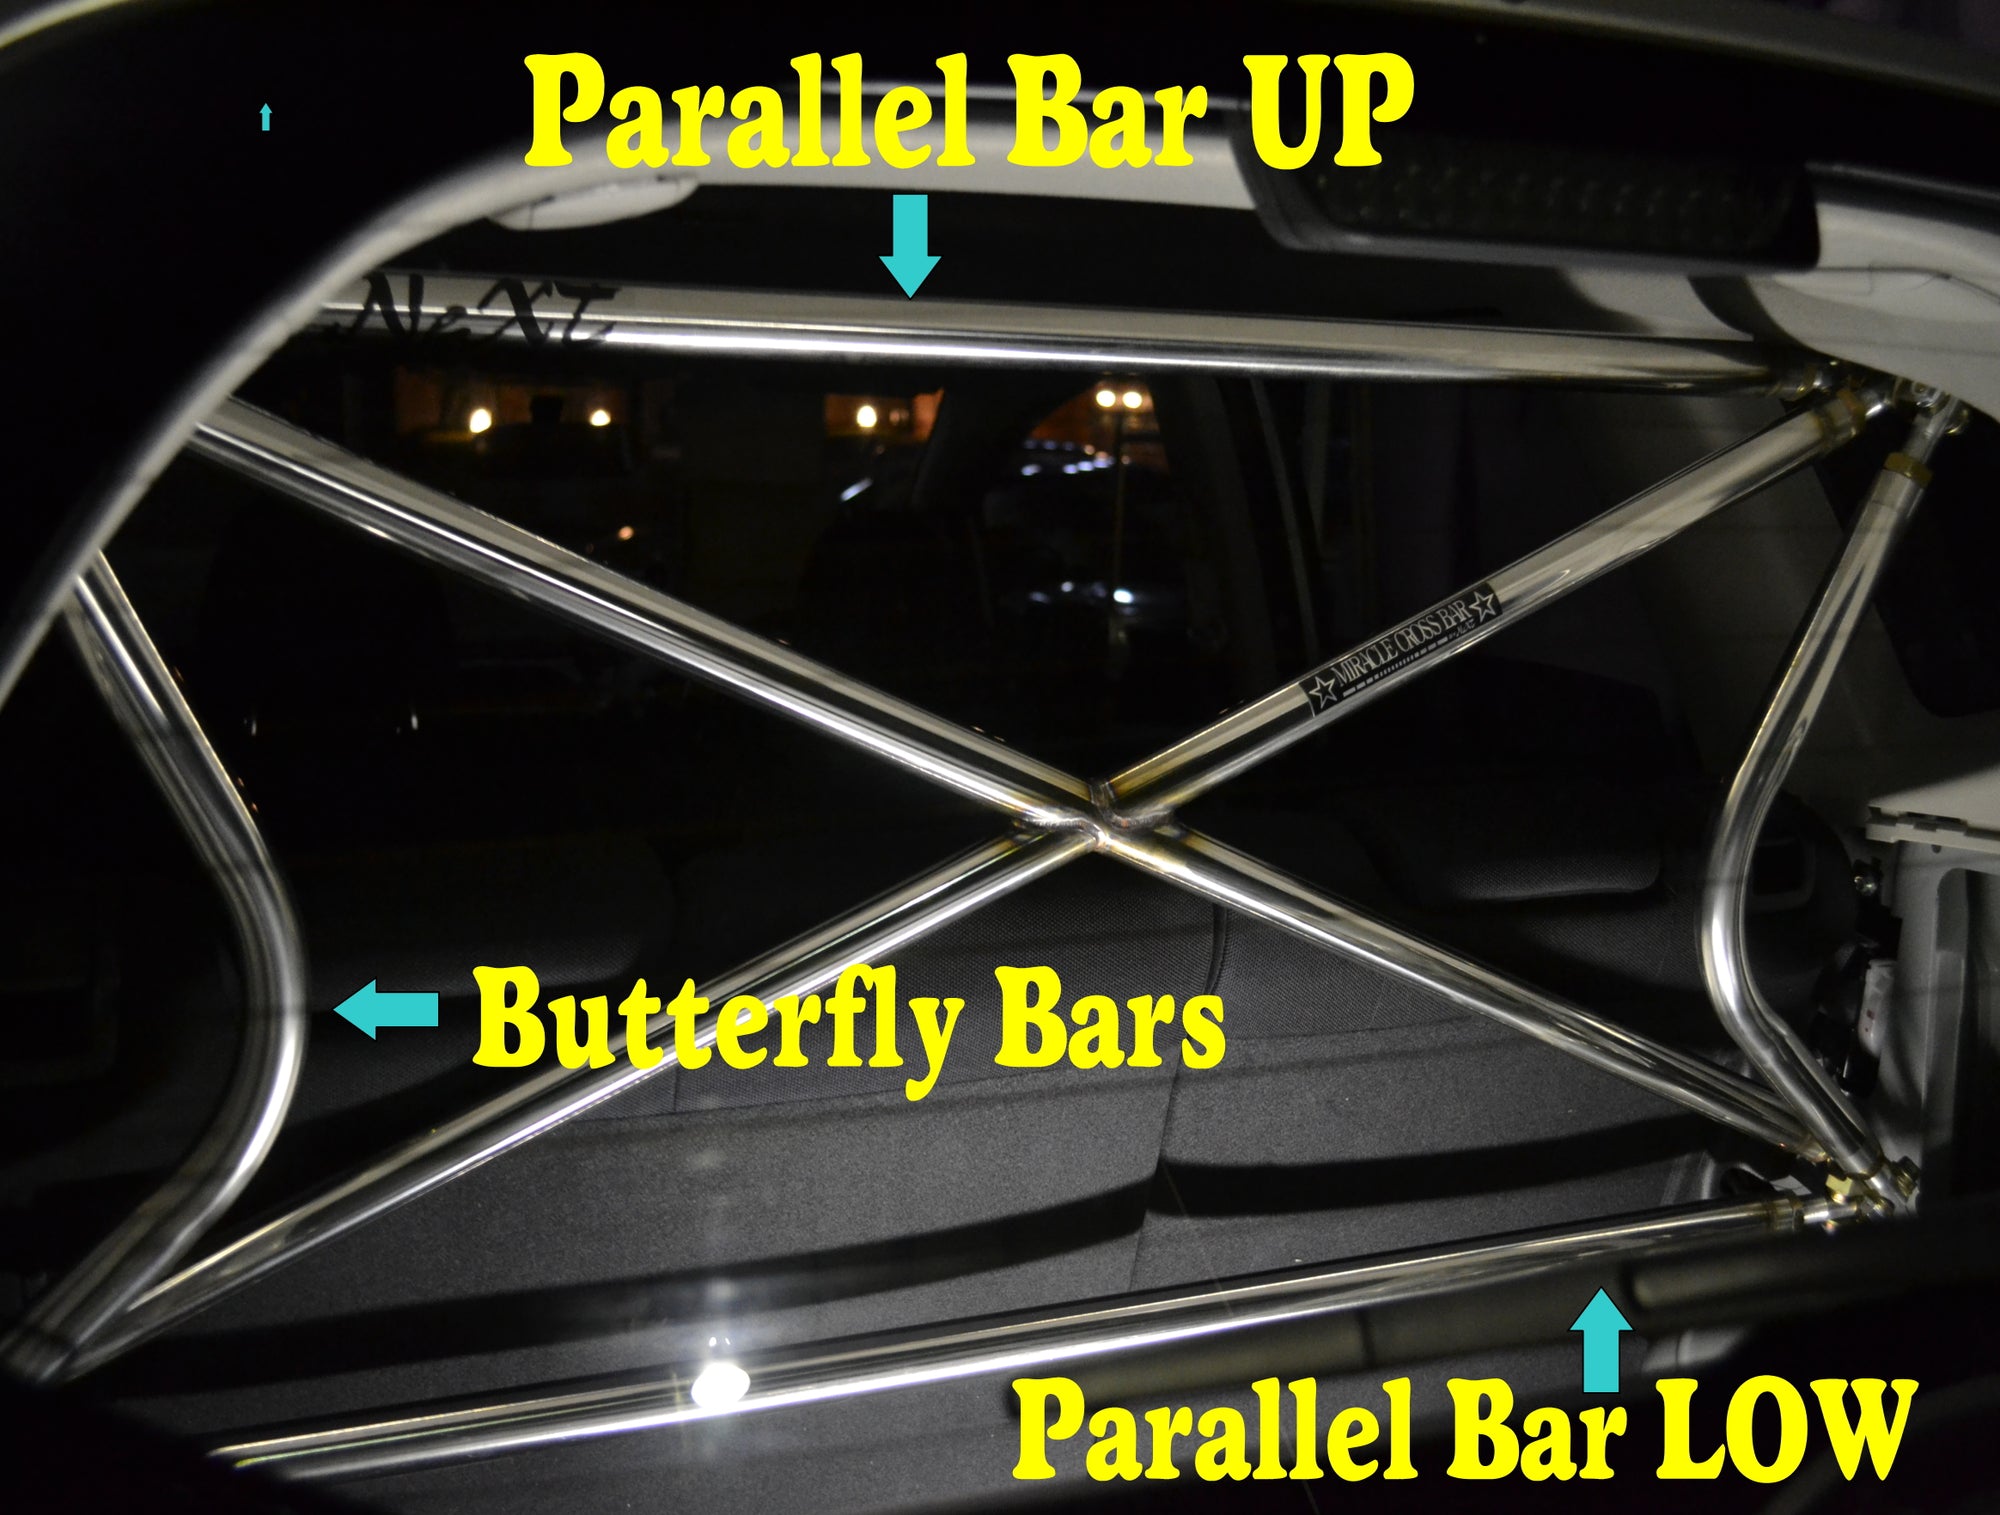 NEXT MIRACLE CROSS BAR BUTTERFLY BAR RIGHT & LEFT STAINLESS 32 FOR SUBARU IMPREZA GC8 T F NEXT-01607